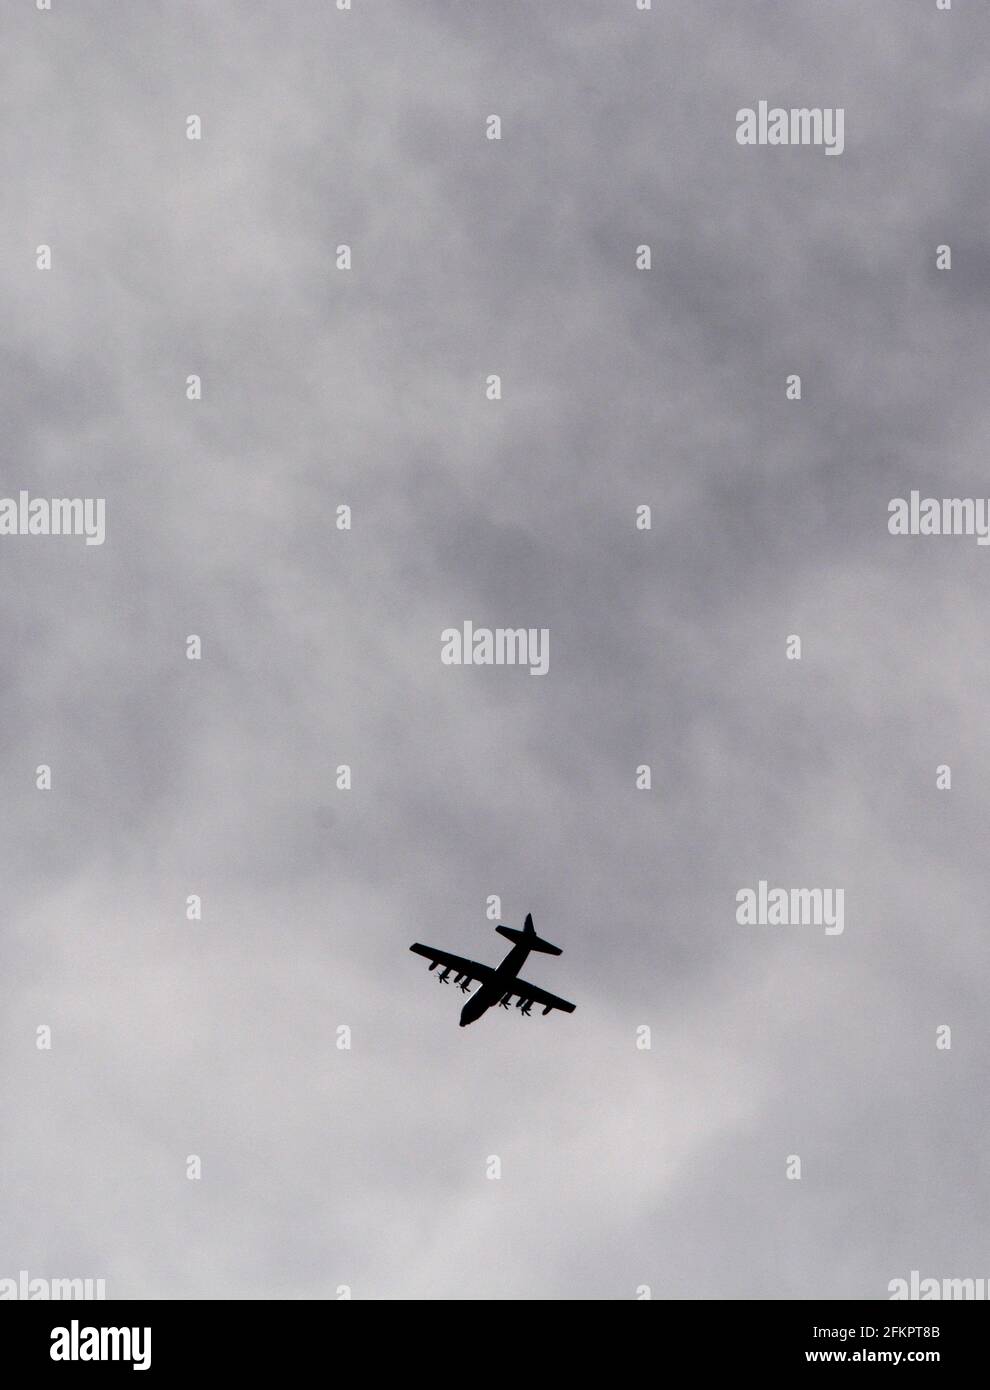 A  U.S. military Lockheed C-130 Hercules Air Force cargo plane approaches its destination at Kirkland Air Force Base in Albuquerque, NM. Stock Photo